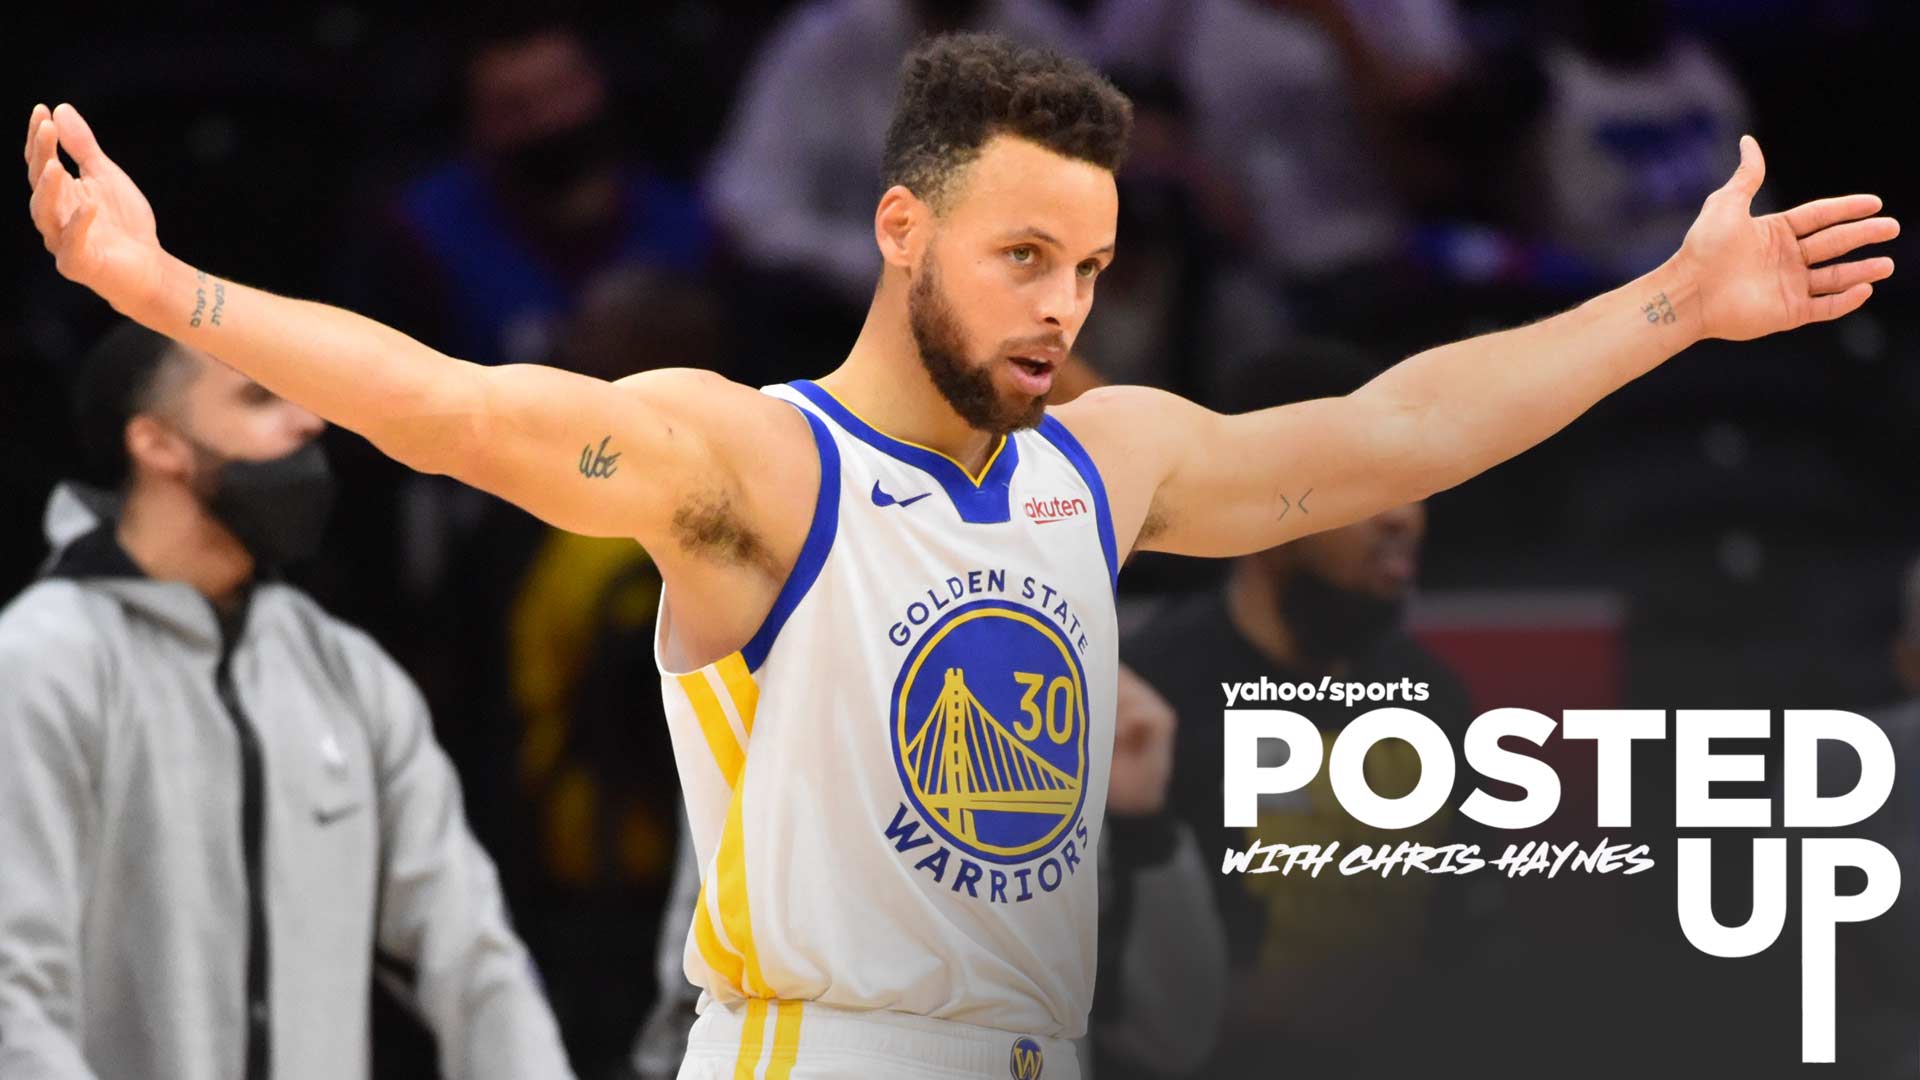 Posted Up - Dissecting Stephen Curry's insane hot streak